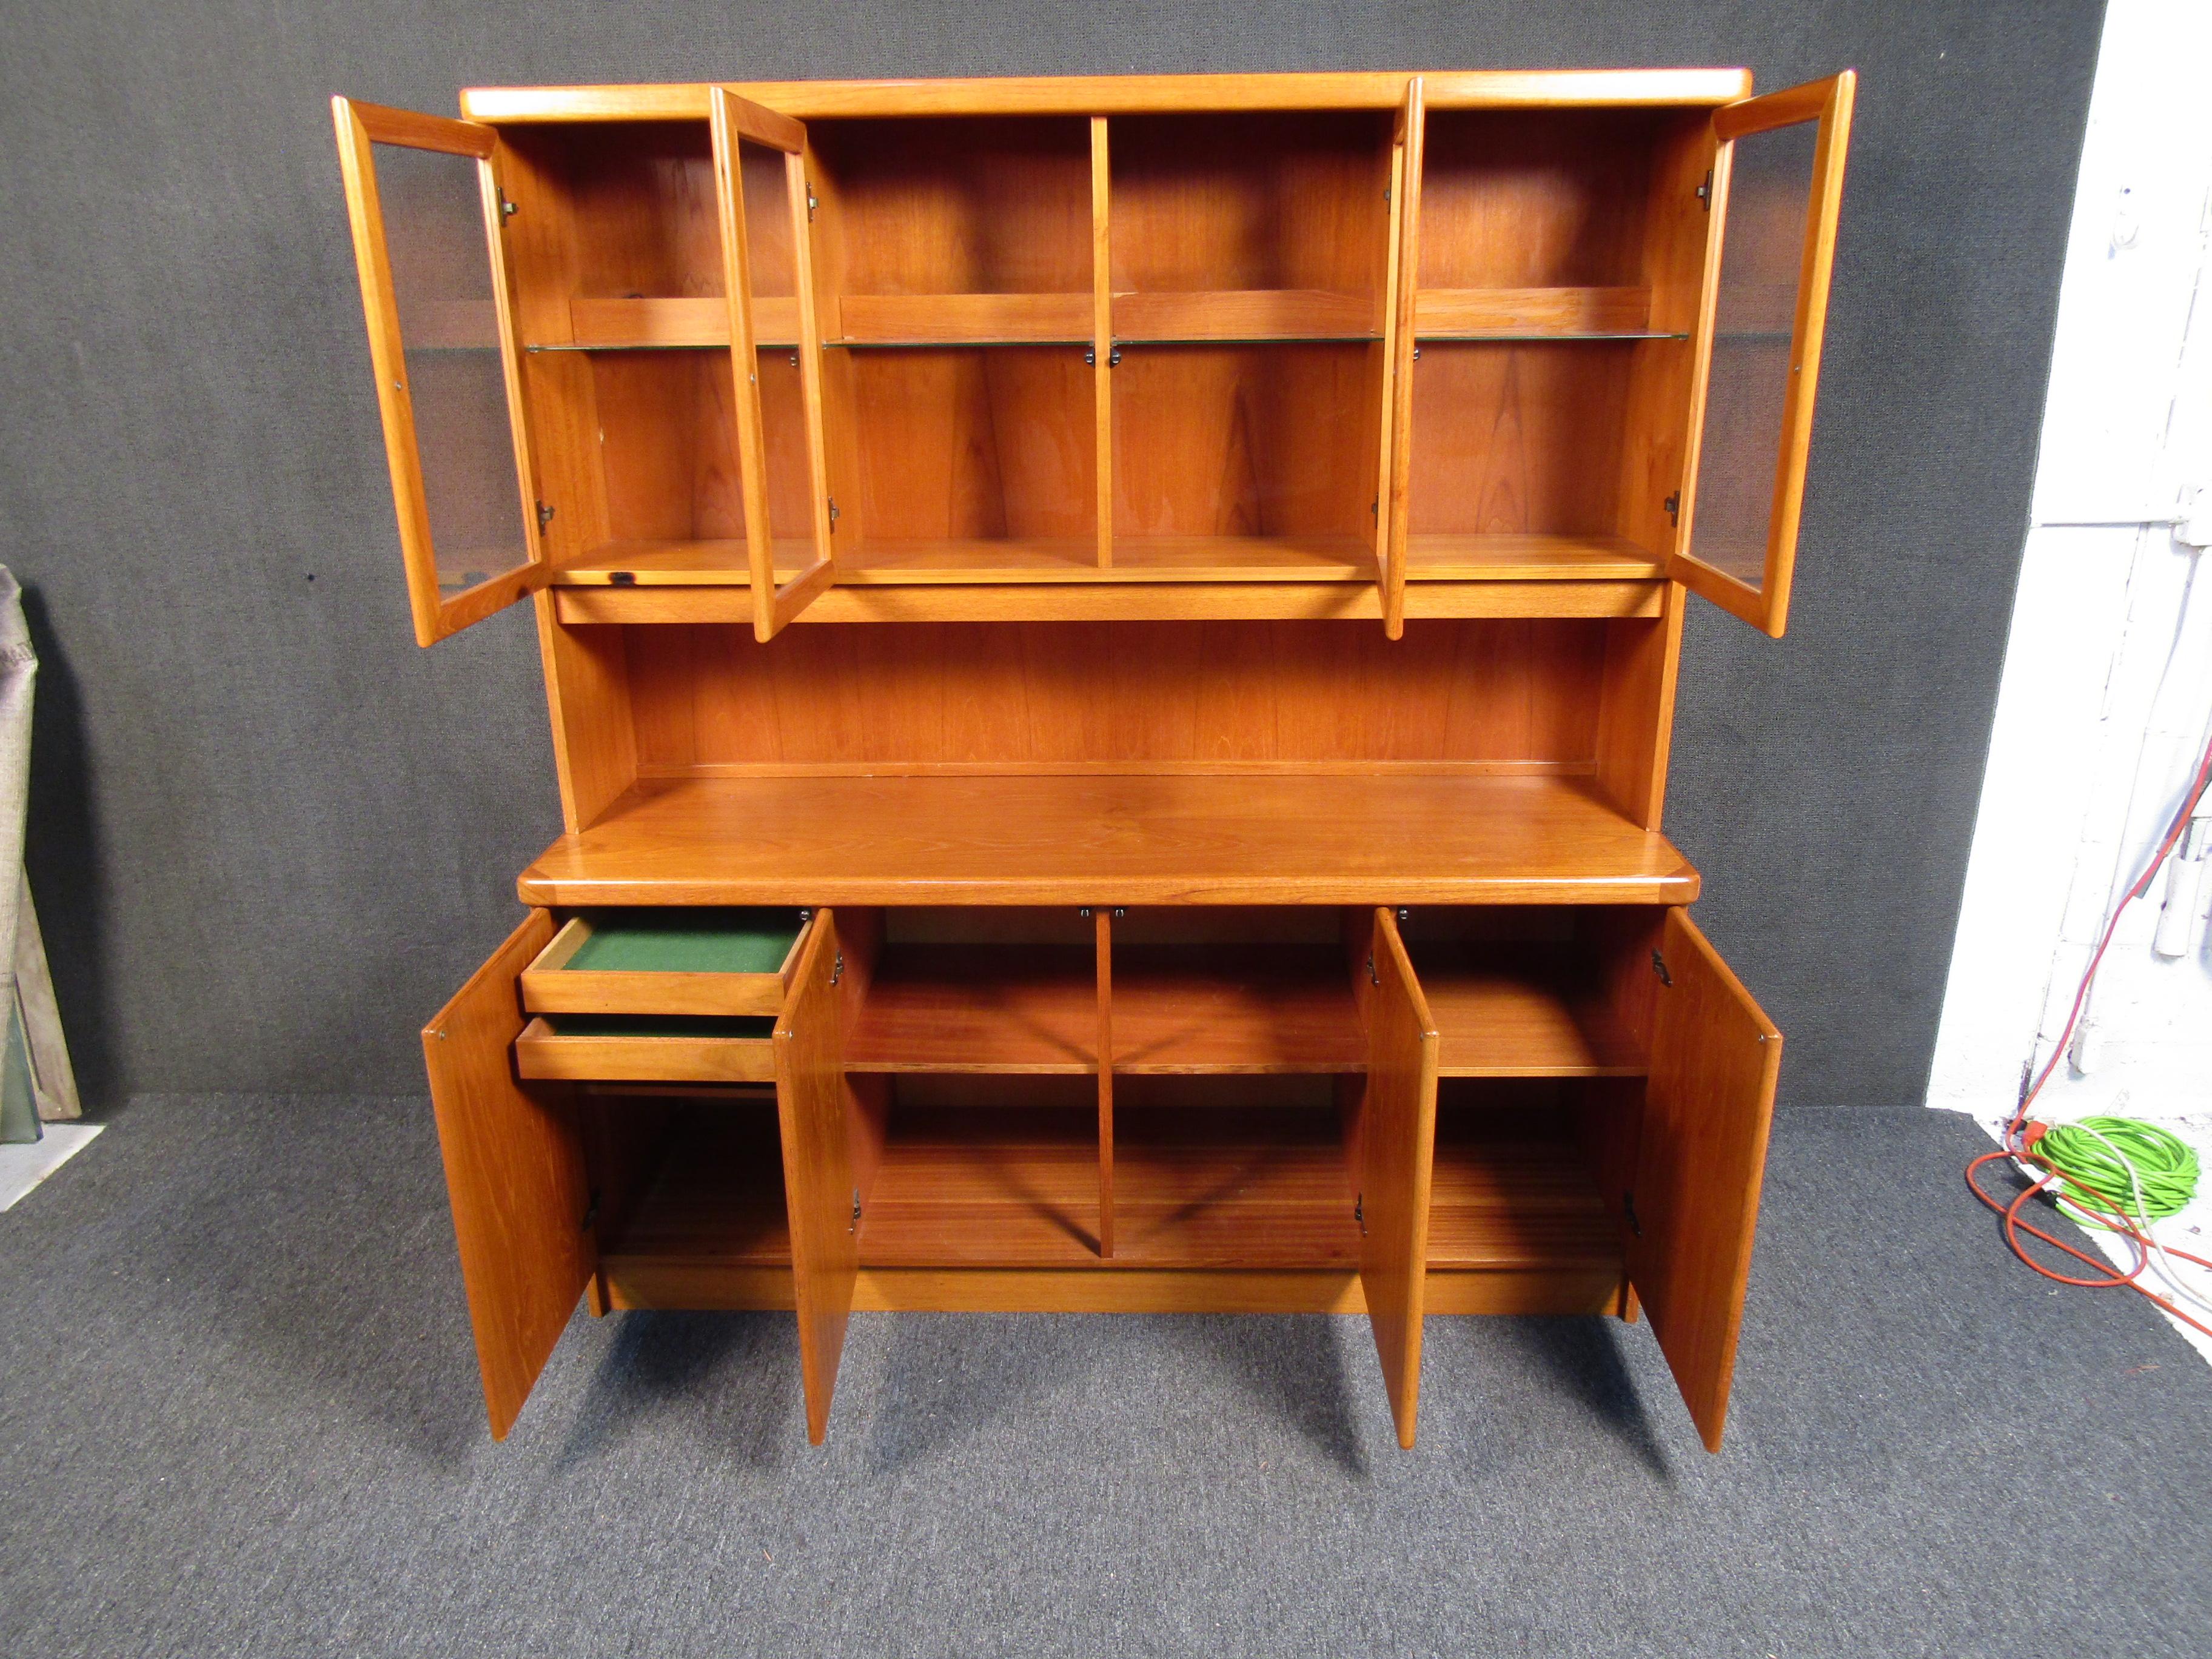 Featuring glass windows, multiple shelves for storage, and rich woodgrain, this Danish Mid-Century piece is versatile and full of classic style. Please confirm item location with seller (NY/NJ).